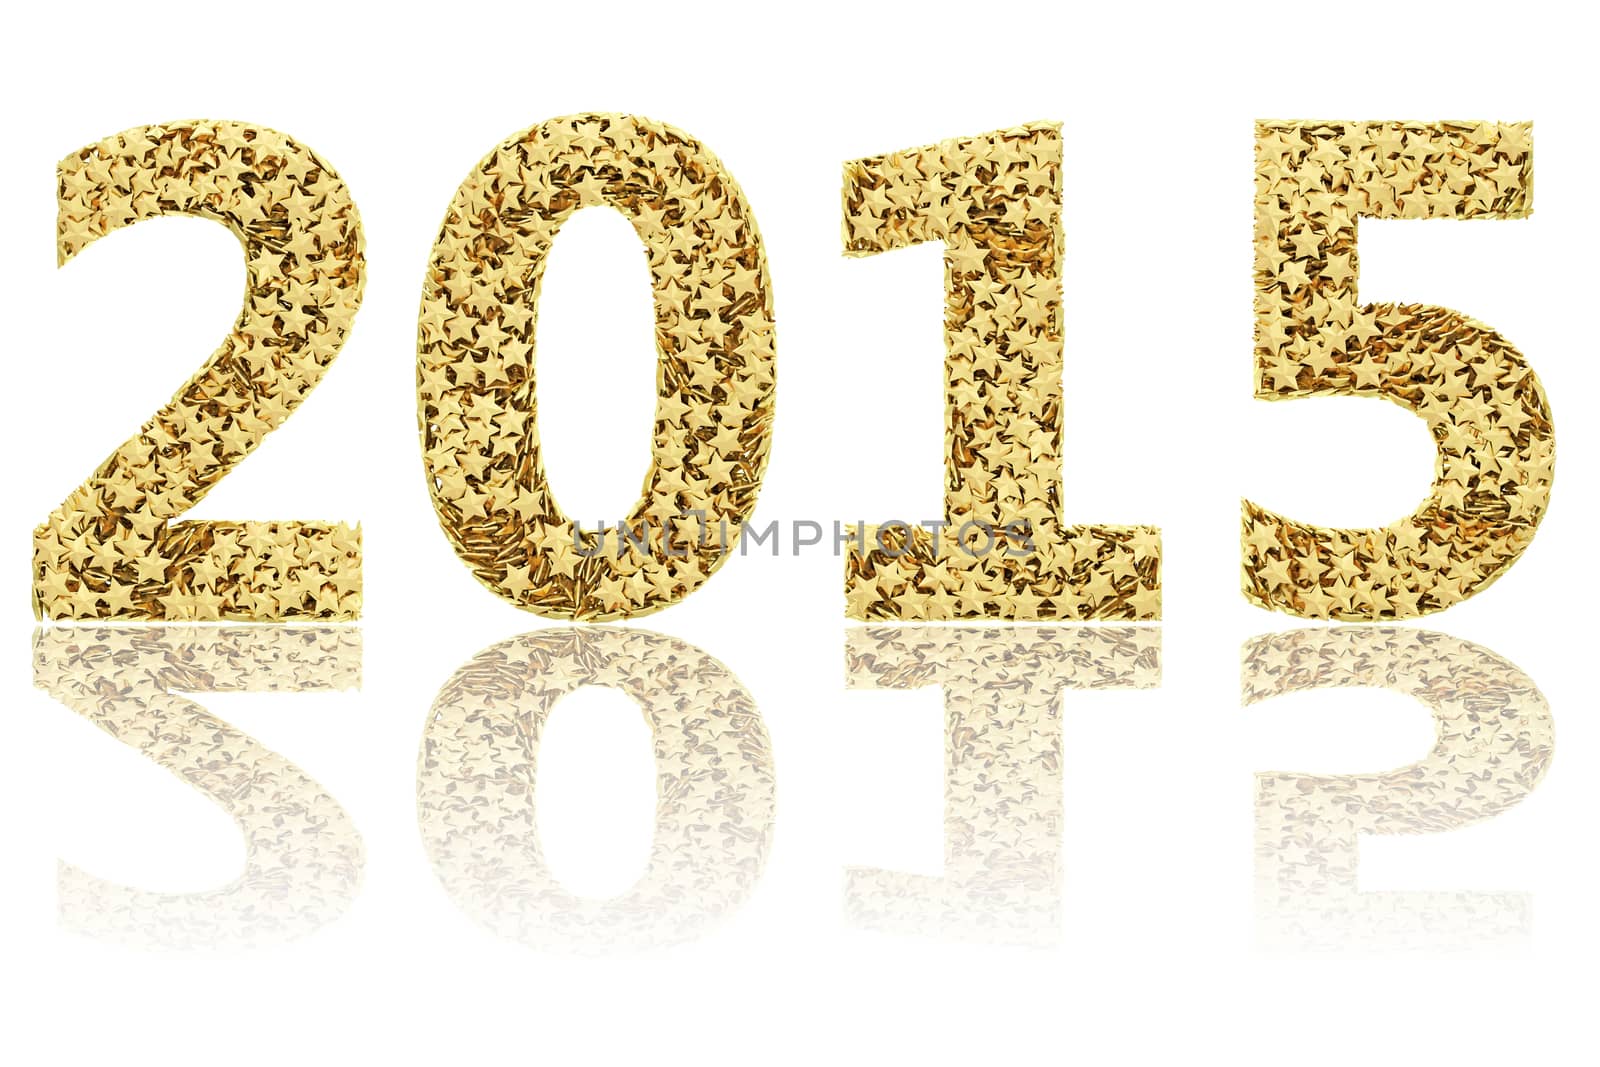 2015 digits composed of small golden stars on glossy white background by oneo